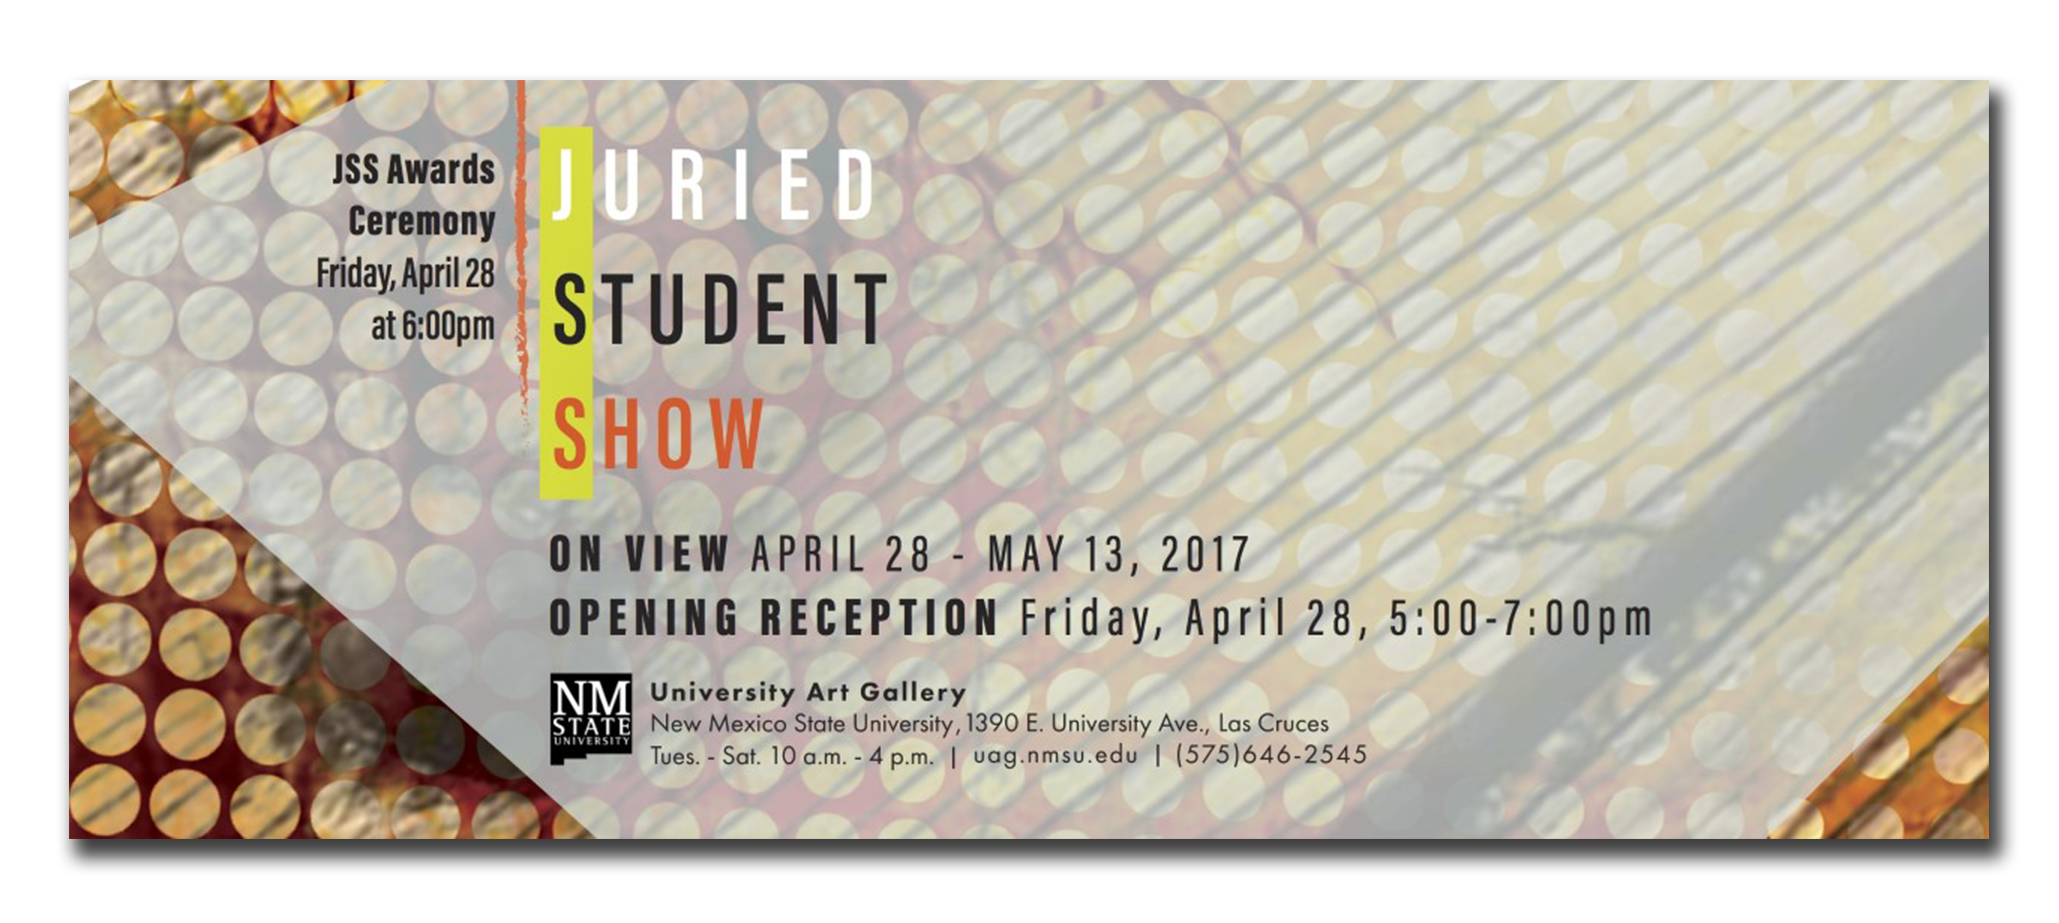 Juried Student Show 2017